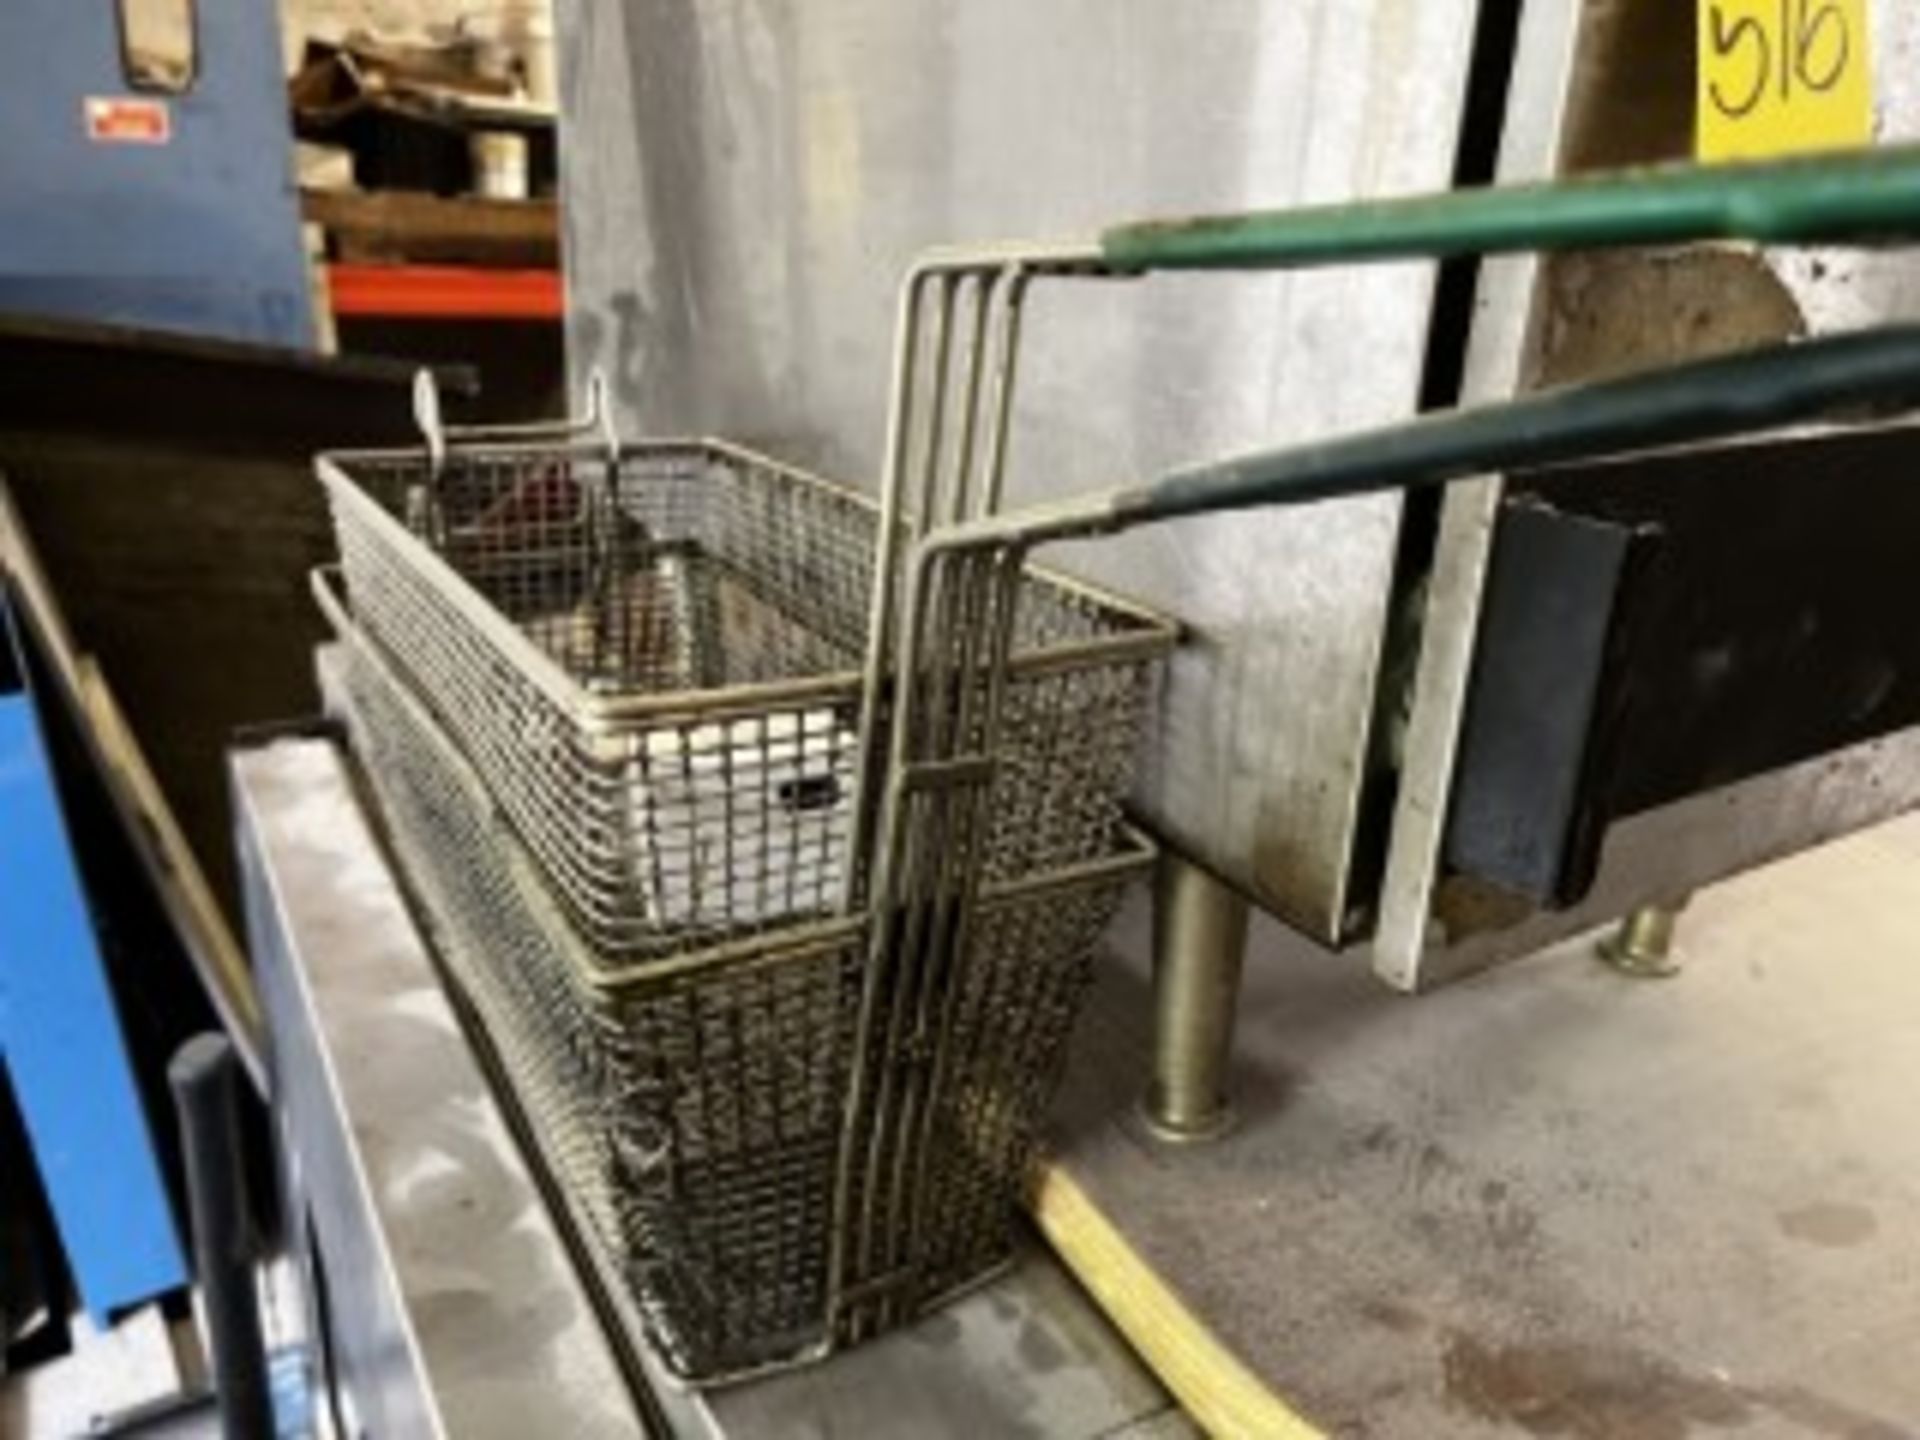 STAR ELECTRIC FRYER WITH 4 BASKETS - Image 3 of 3